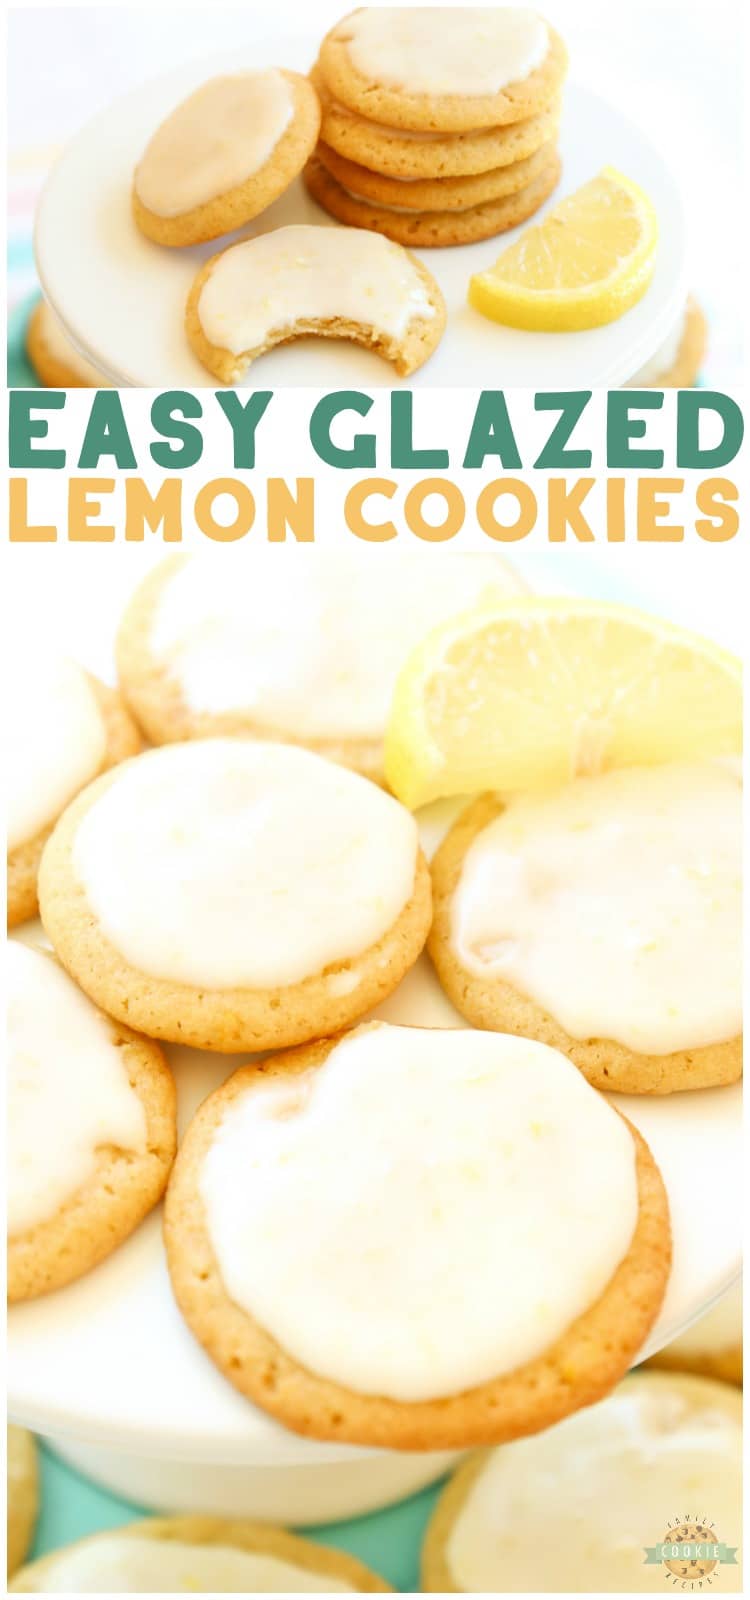 Glazed Lemon Cookies are sweet frosted lemon butter cookies made with fresh lemons. This delicious lemon cookie recipe is the perfect amount of sweet and tart. via @buttergirls